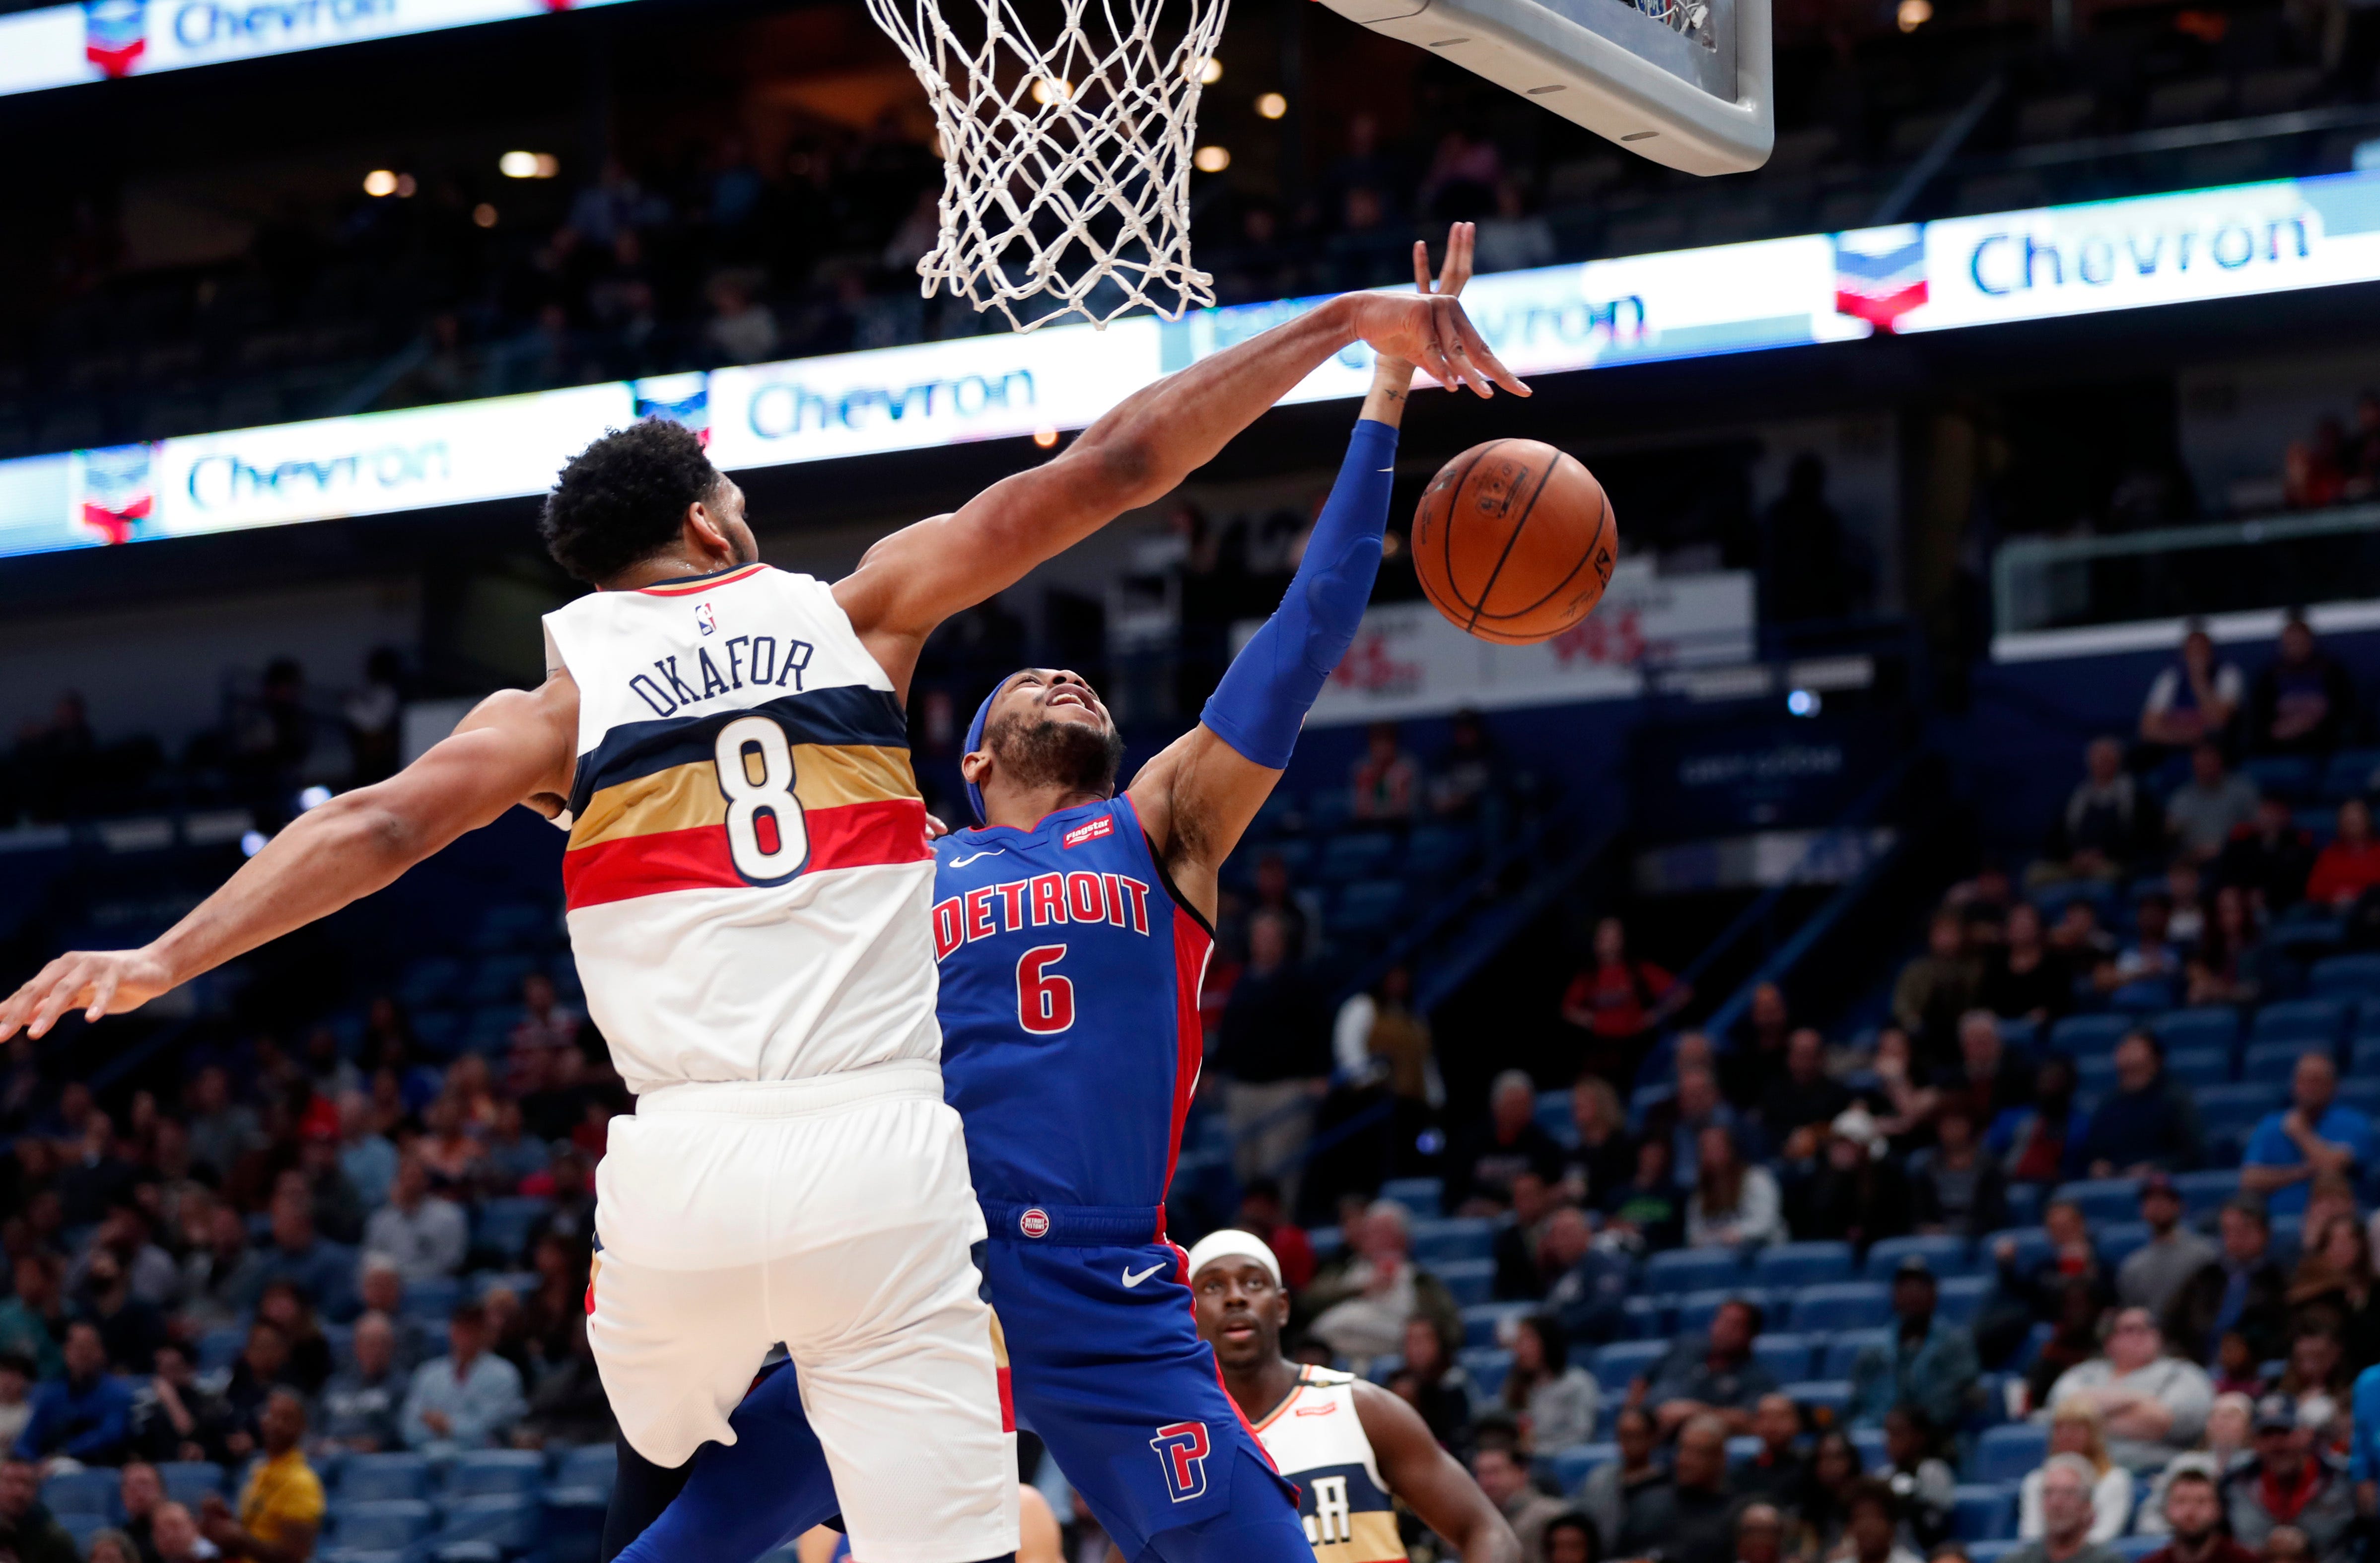 New Orleans Pelicans center Jahlil Okafor (8) blocks a shot by Detroit Pistons guard Bruce Brown (6) in the first half.